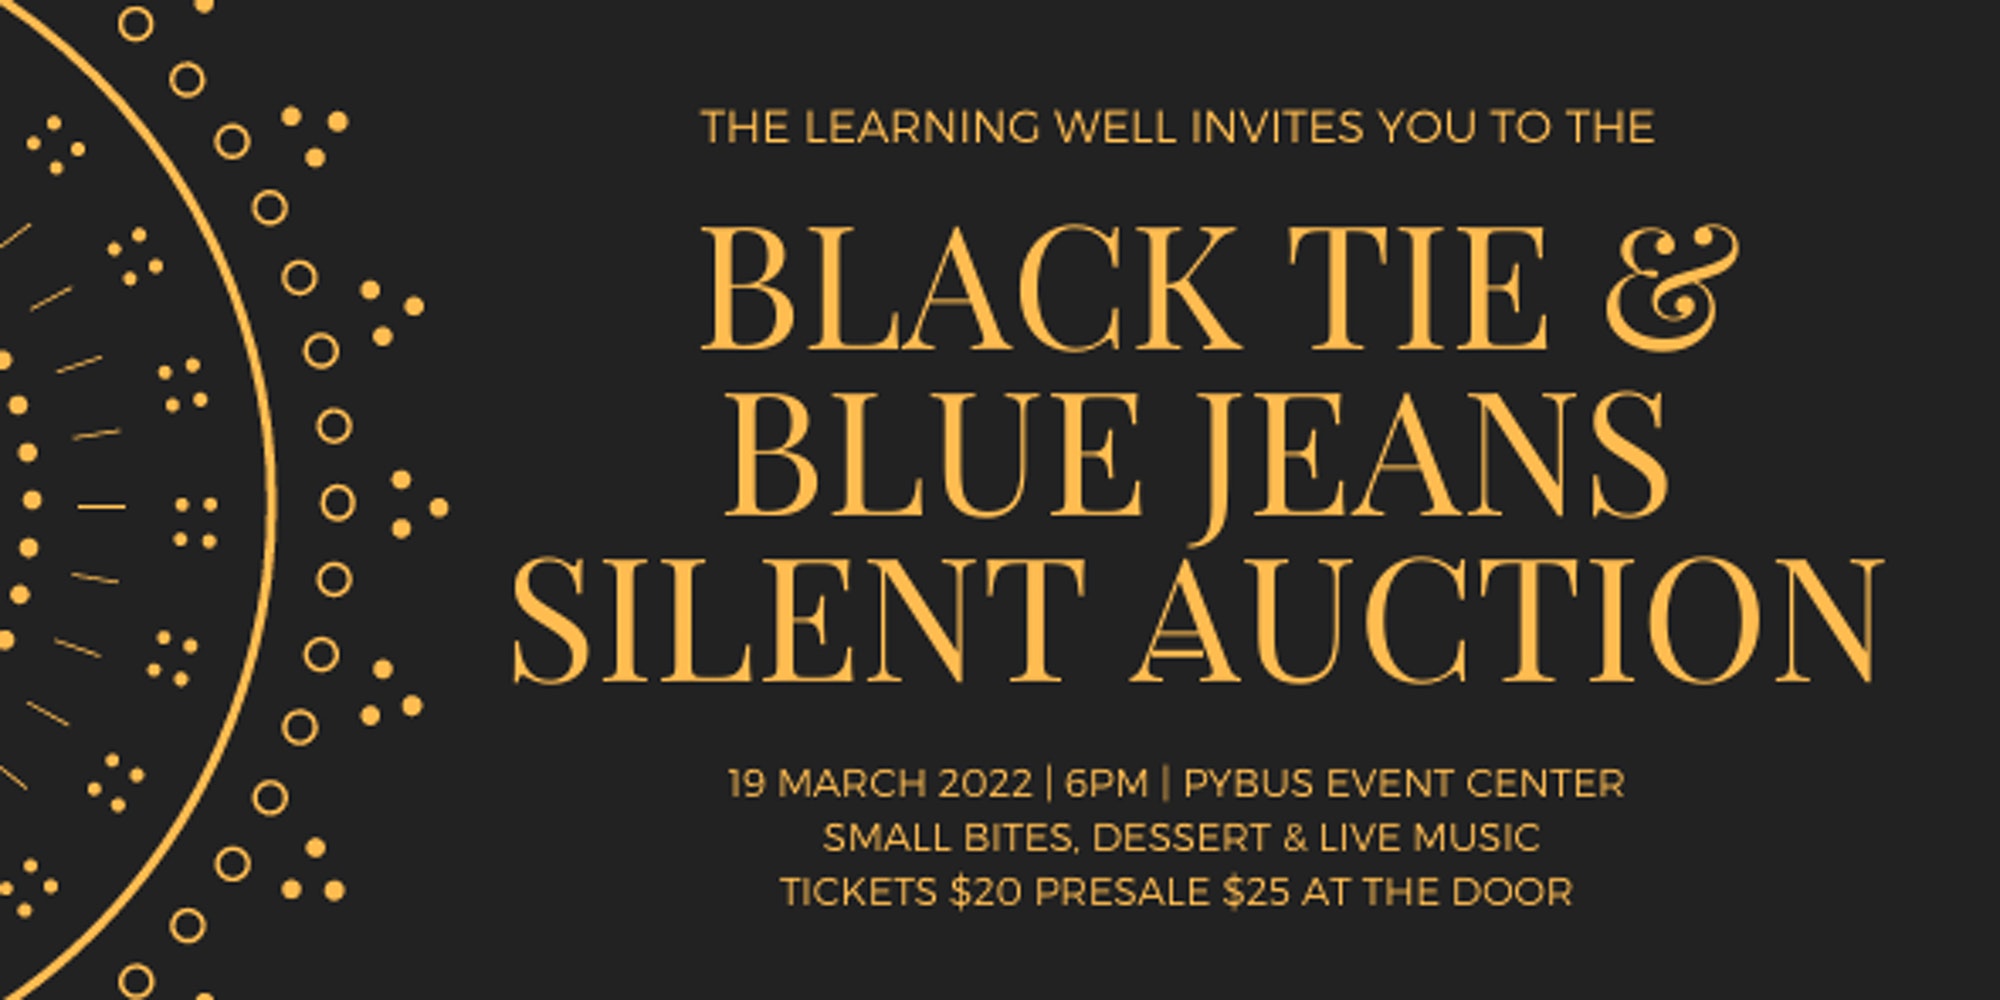 <h1 class="tribe-events-single-event-title">The Learning Well’s Black Tie & Blue Jeans Silent Auction</h1>